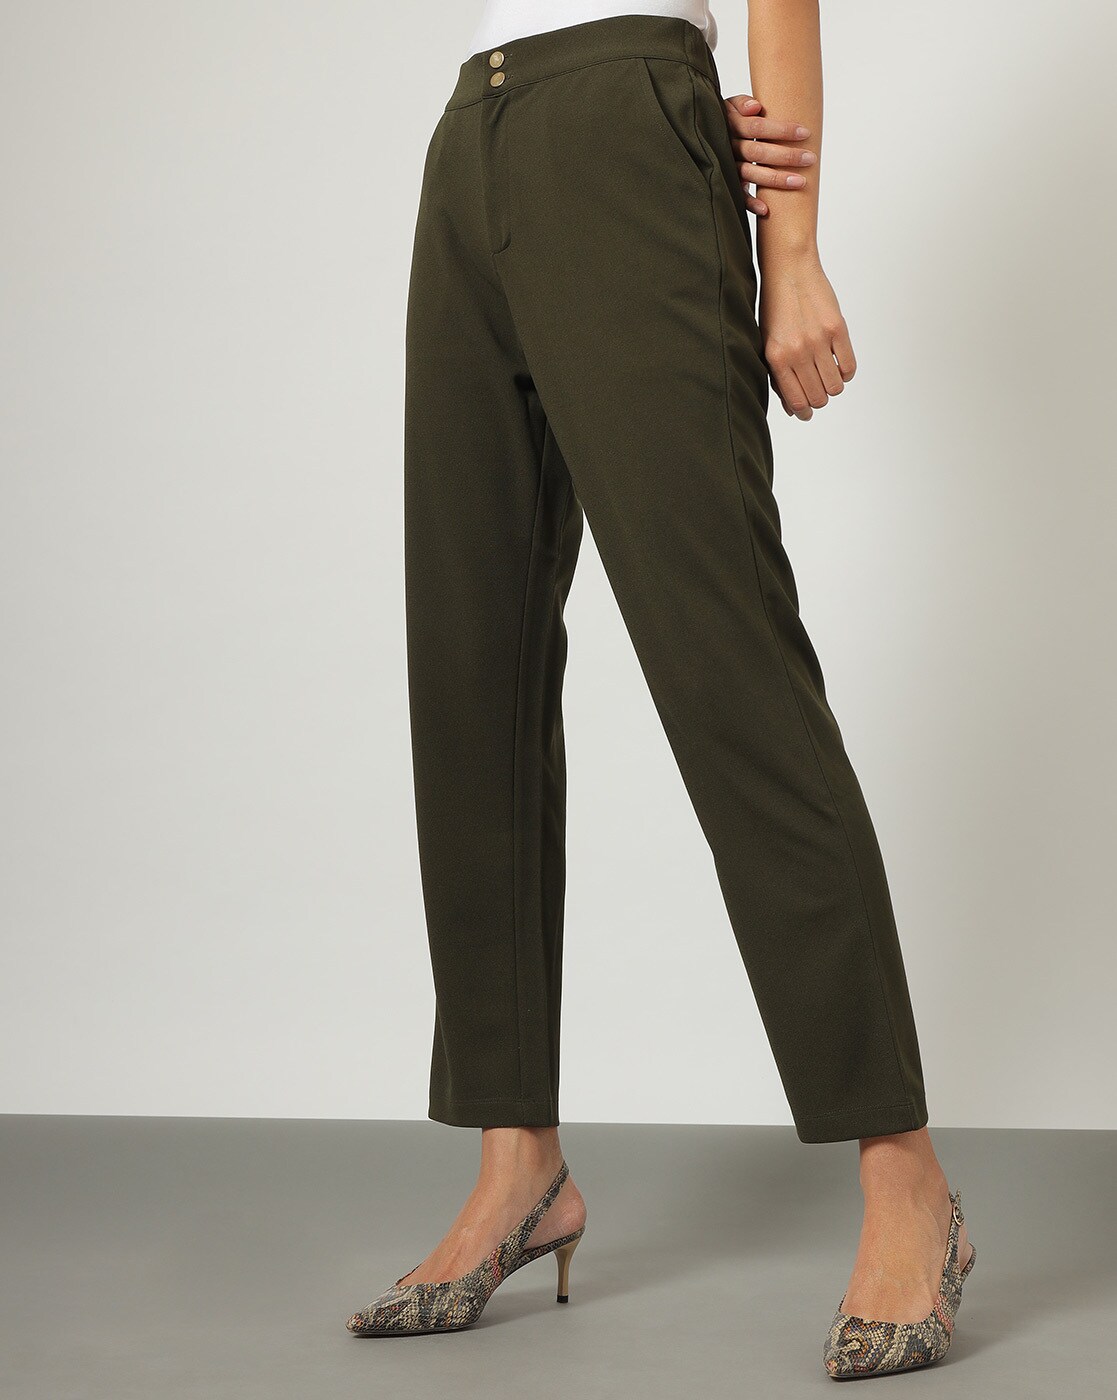 Buy Globus Women Olive Solid Trousers at Amazon.in